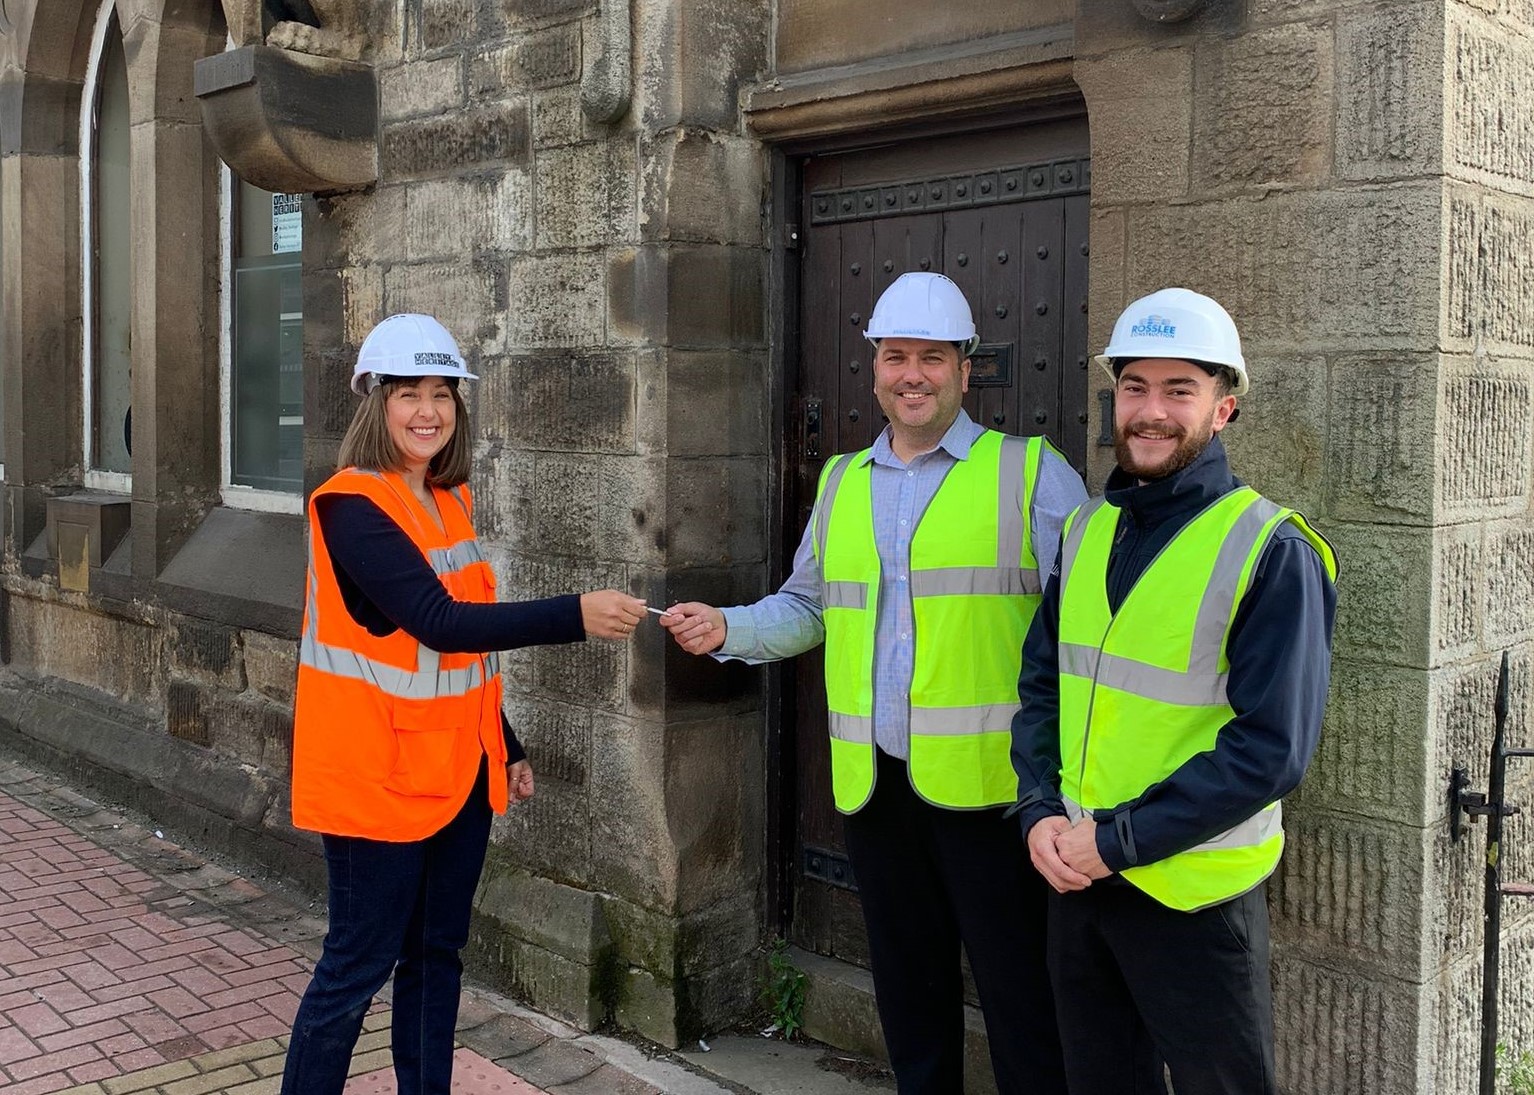 Valley Heritage hand over the keys to Rosslee Construction outside the front door of Alliance at the Lancashire and Yorkshire Bank